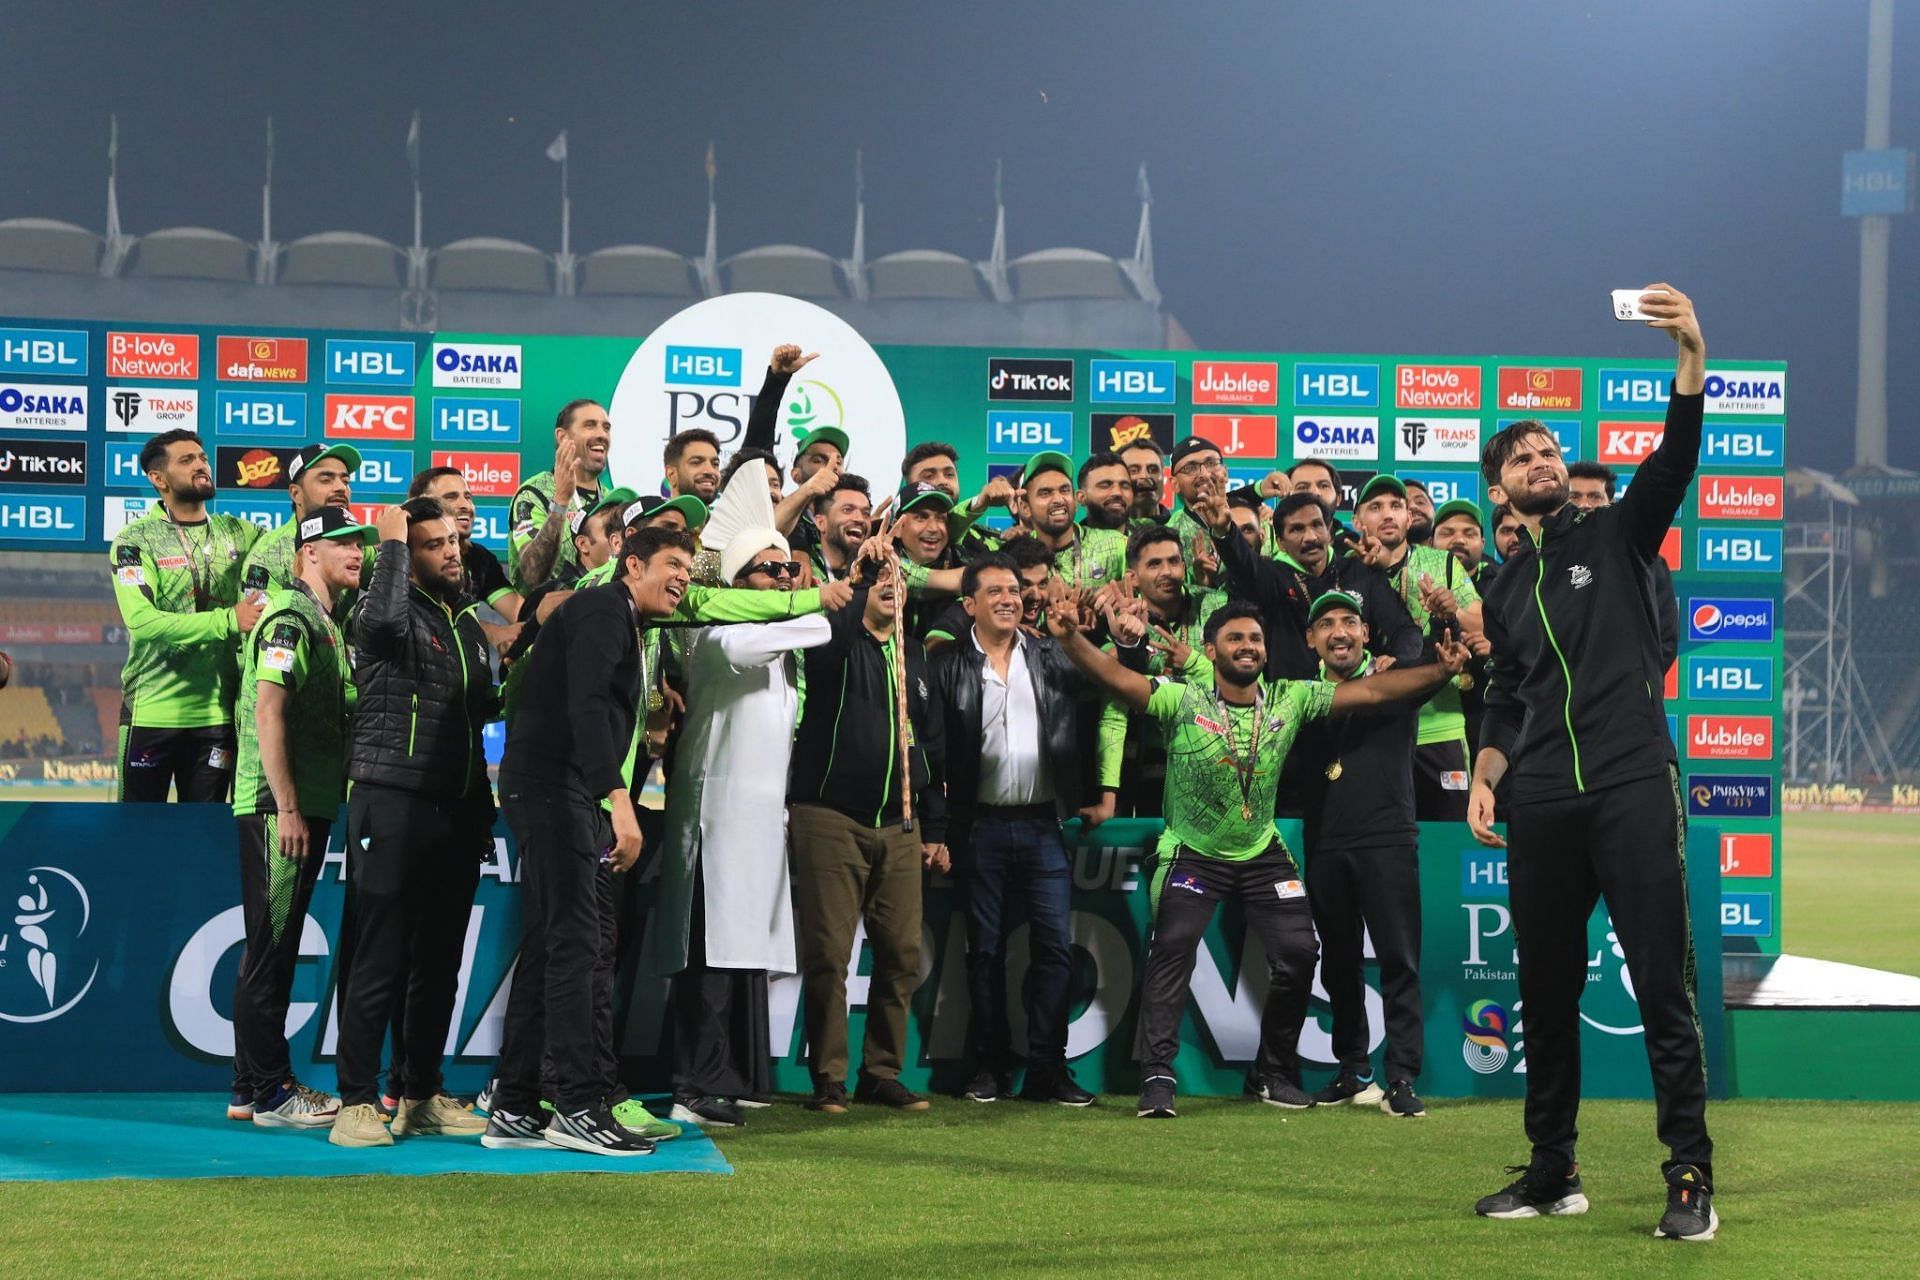 Lahore Qalandars celebrate their title win. (Credits: Twitter)